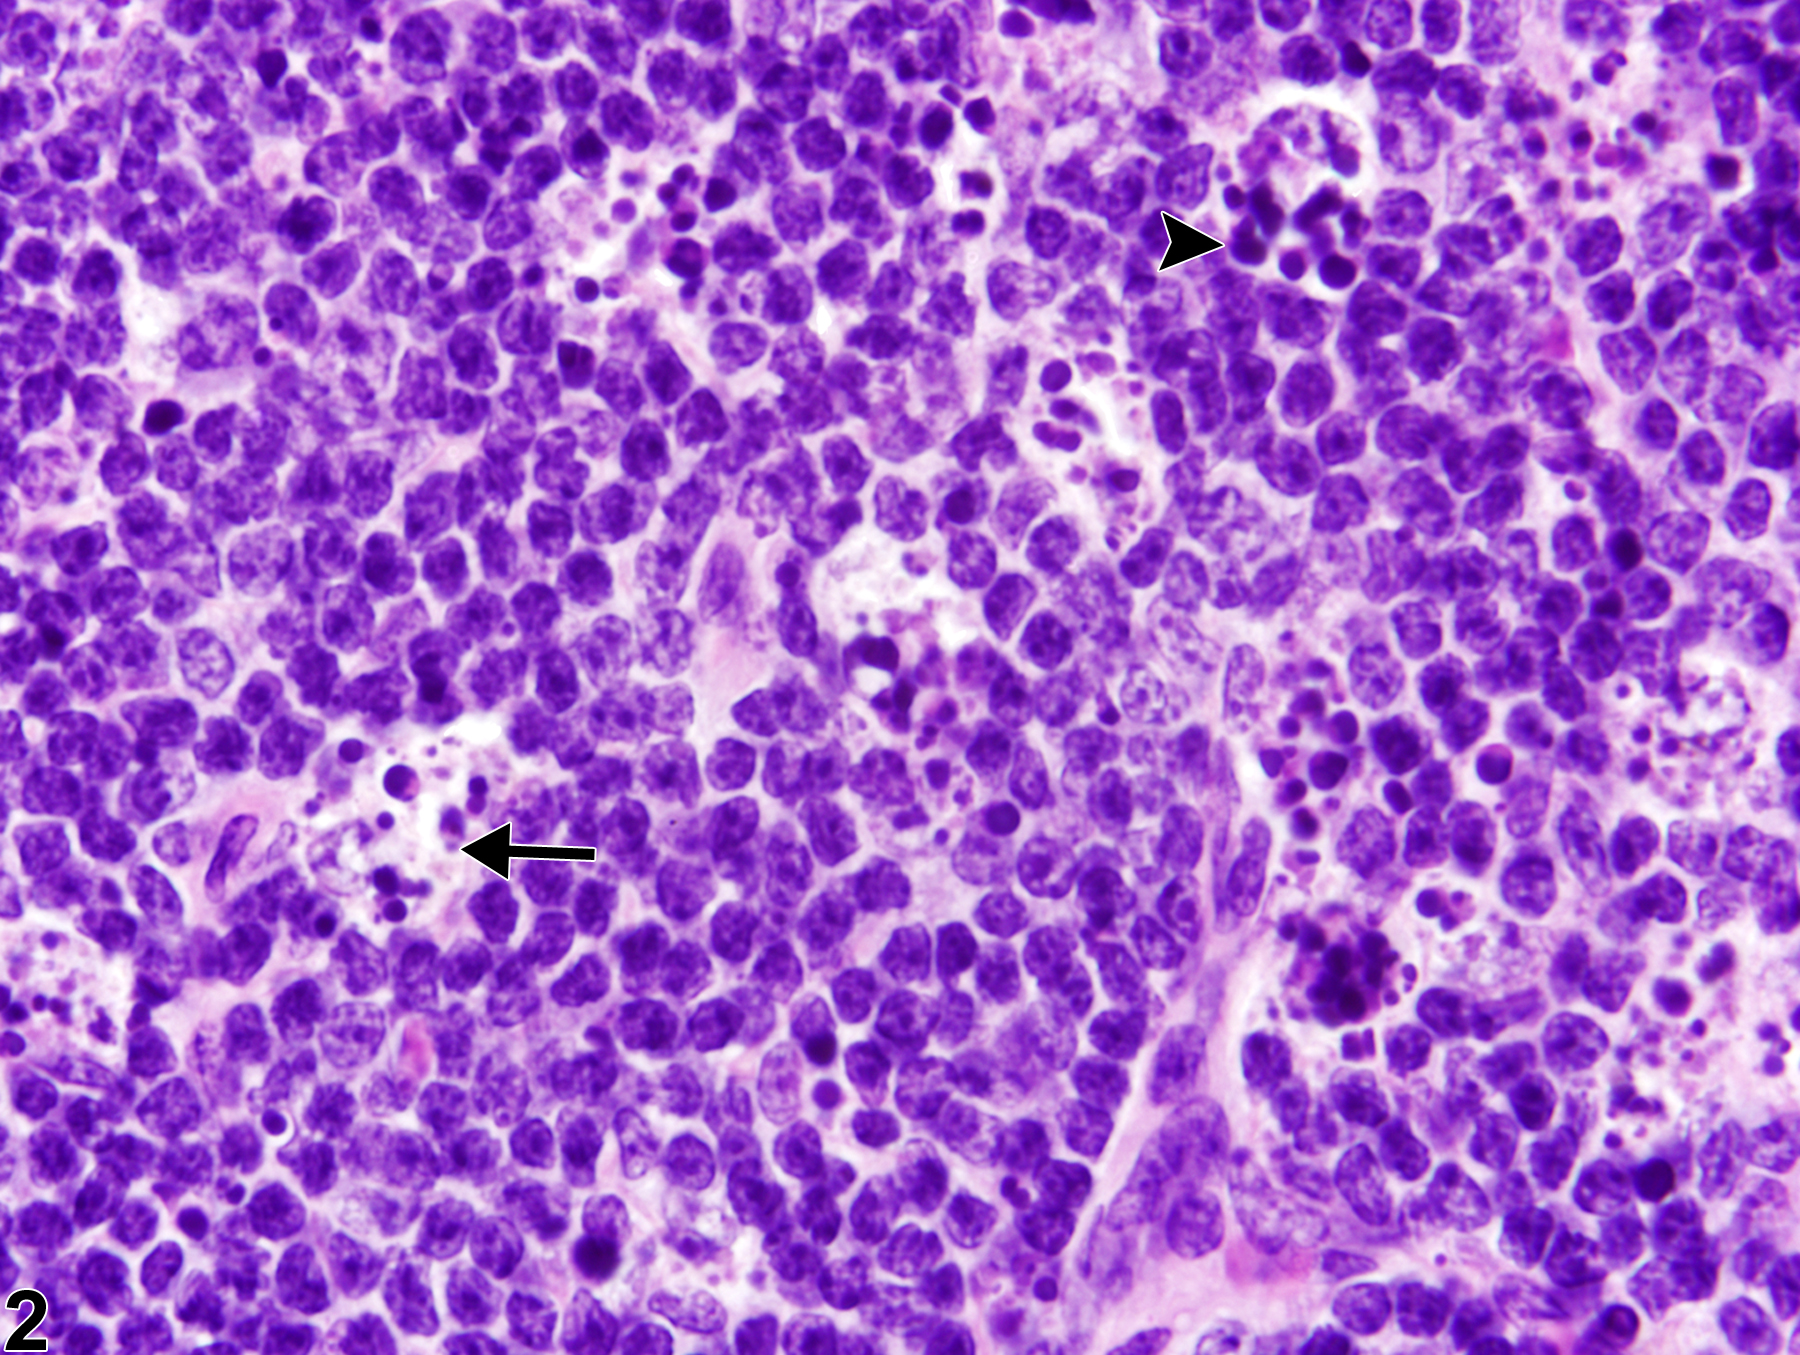 Image of apoptosis, lymphocyte in the spleen from a female B6C3F1/N mouse in a subchronic study